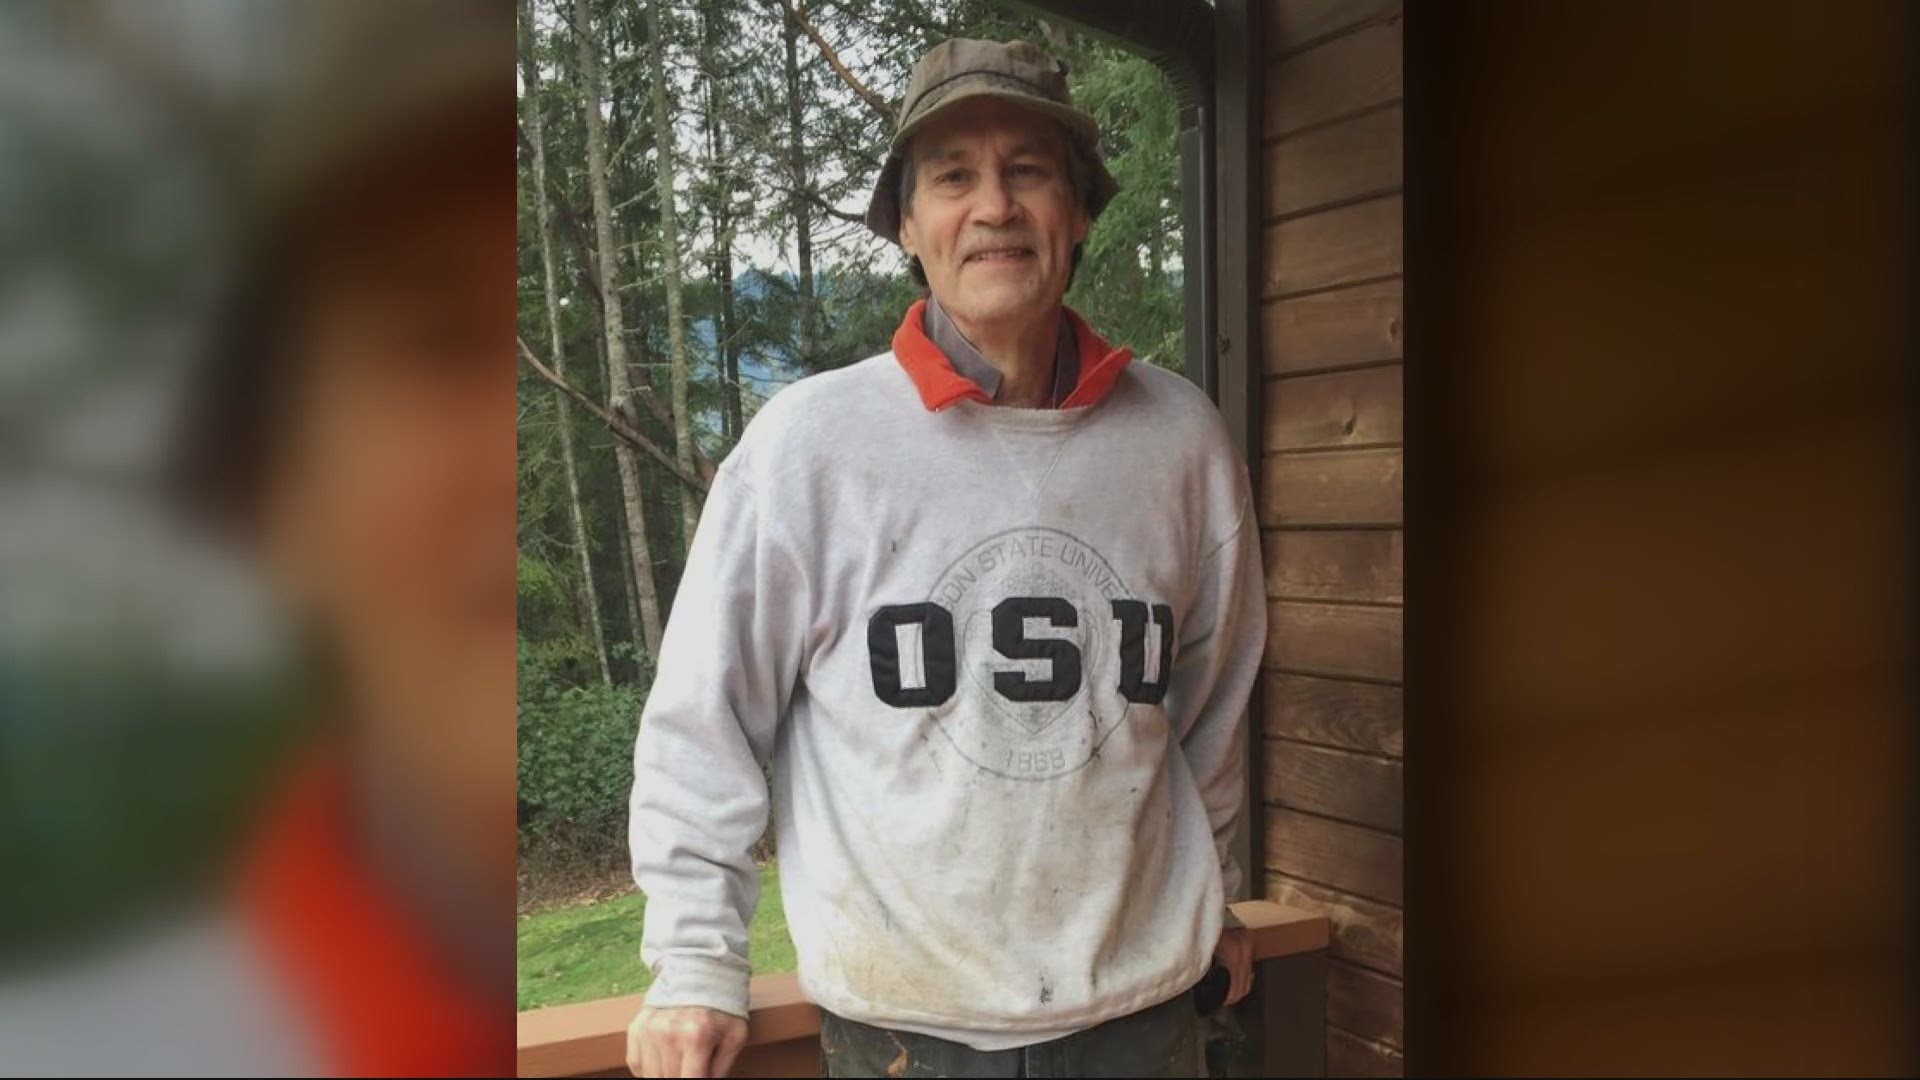 A search and rescue crew located 69-year-old Harry Burleigh Sunday, the Douglas County Sheriff's Office said; he was walking and in stable condition.